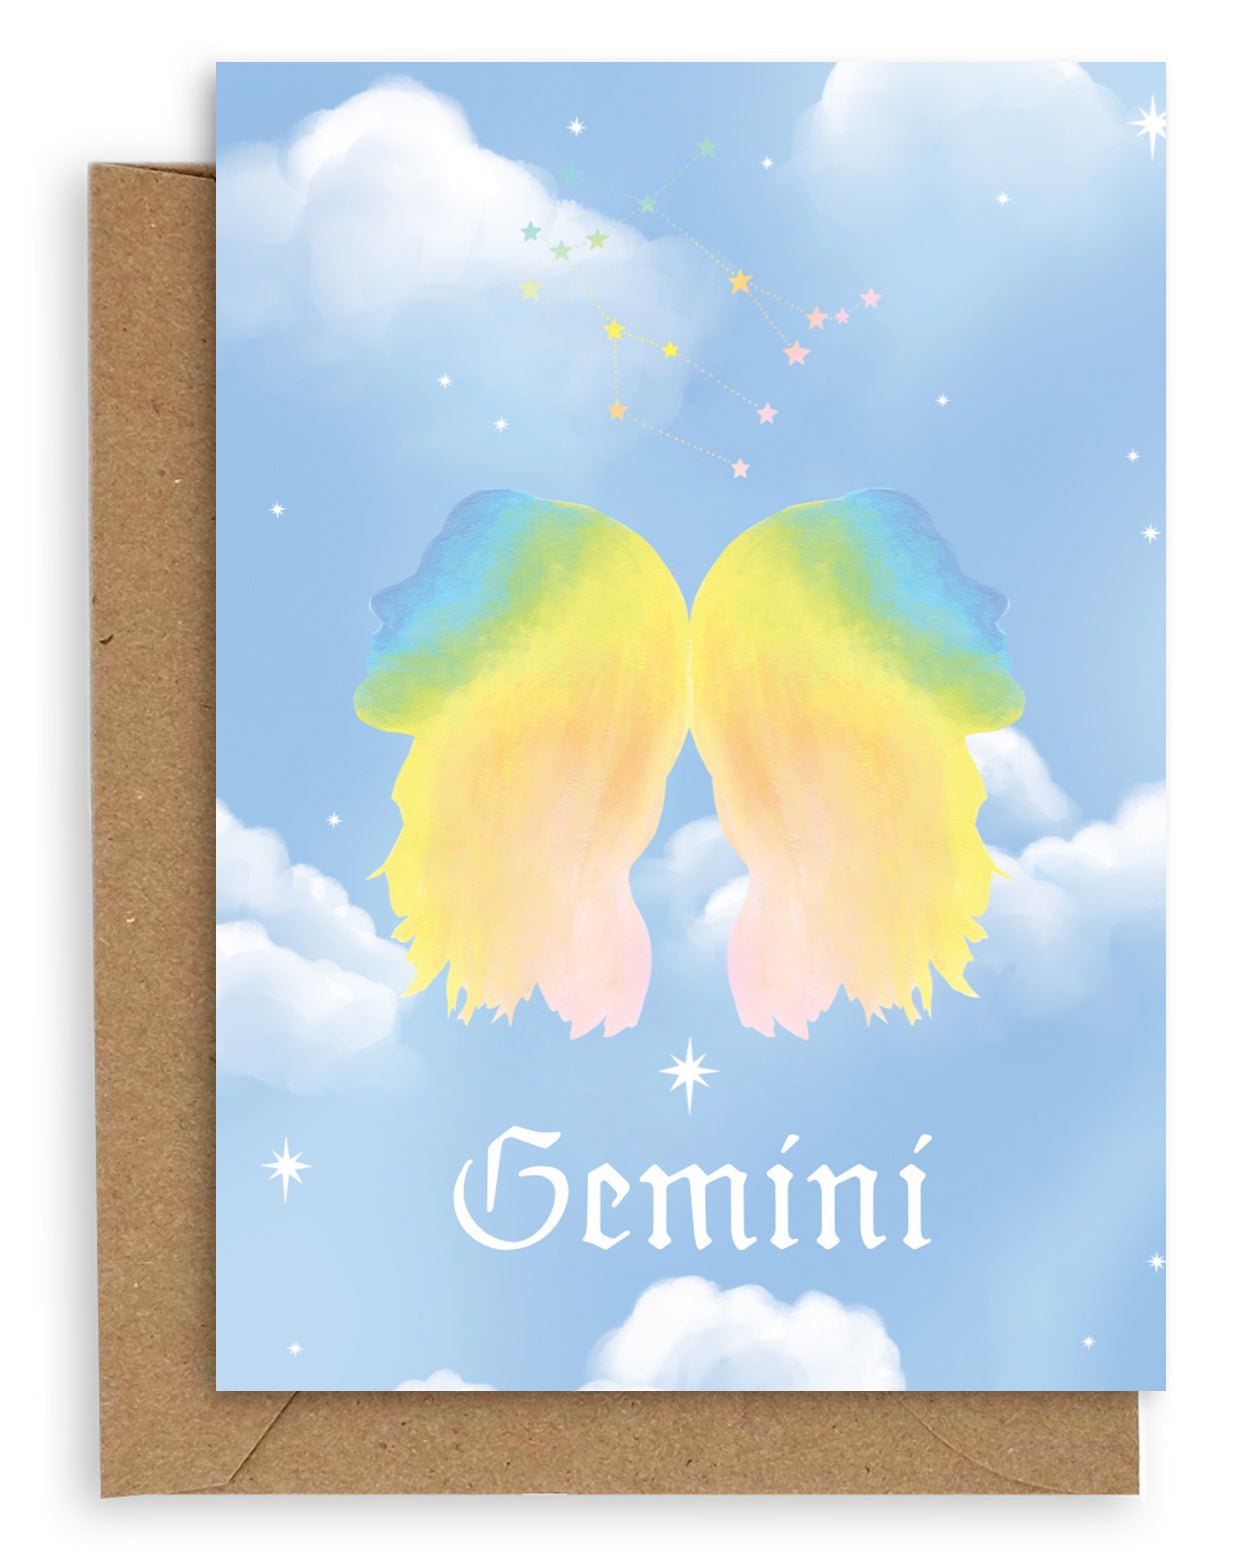 Gemini  Horoscope card with a kraft envelope. The horoscope symbol is painted in rainbow pastel on a blue background with white clouds. 